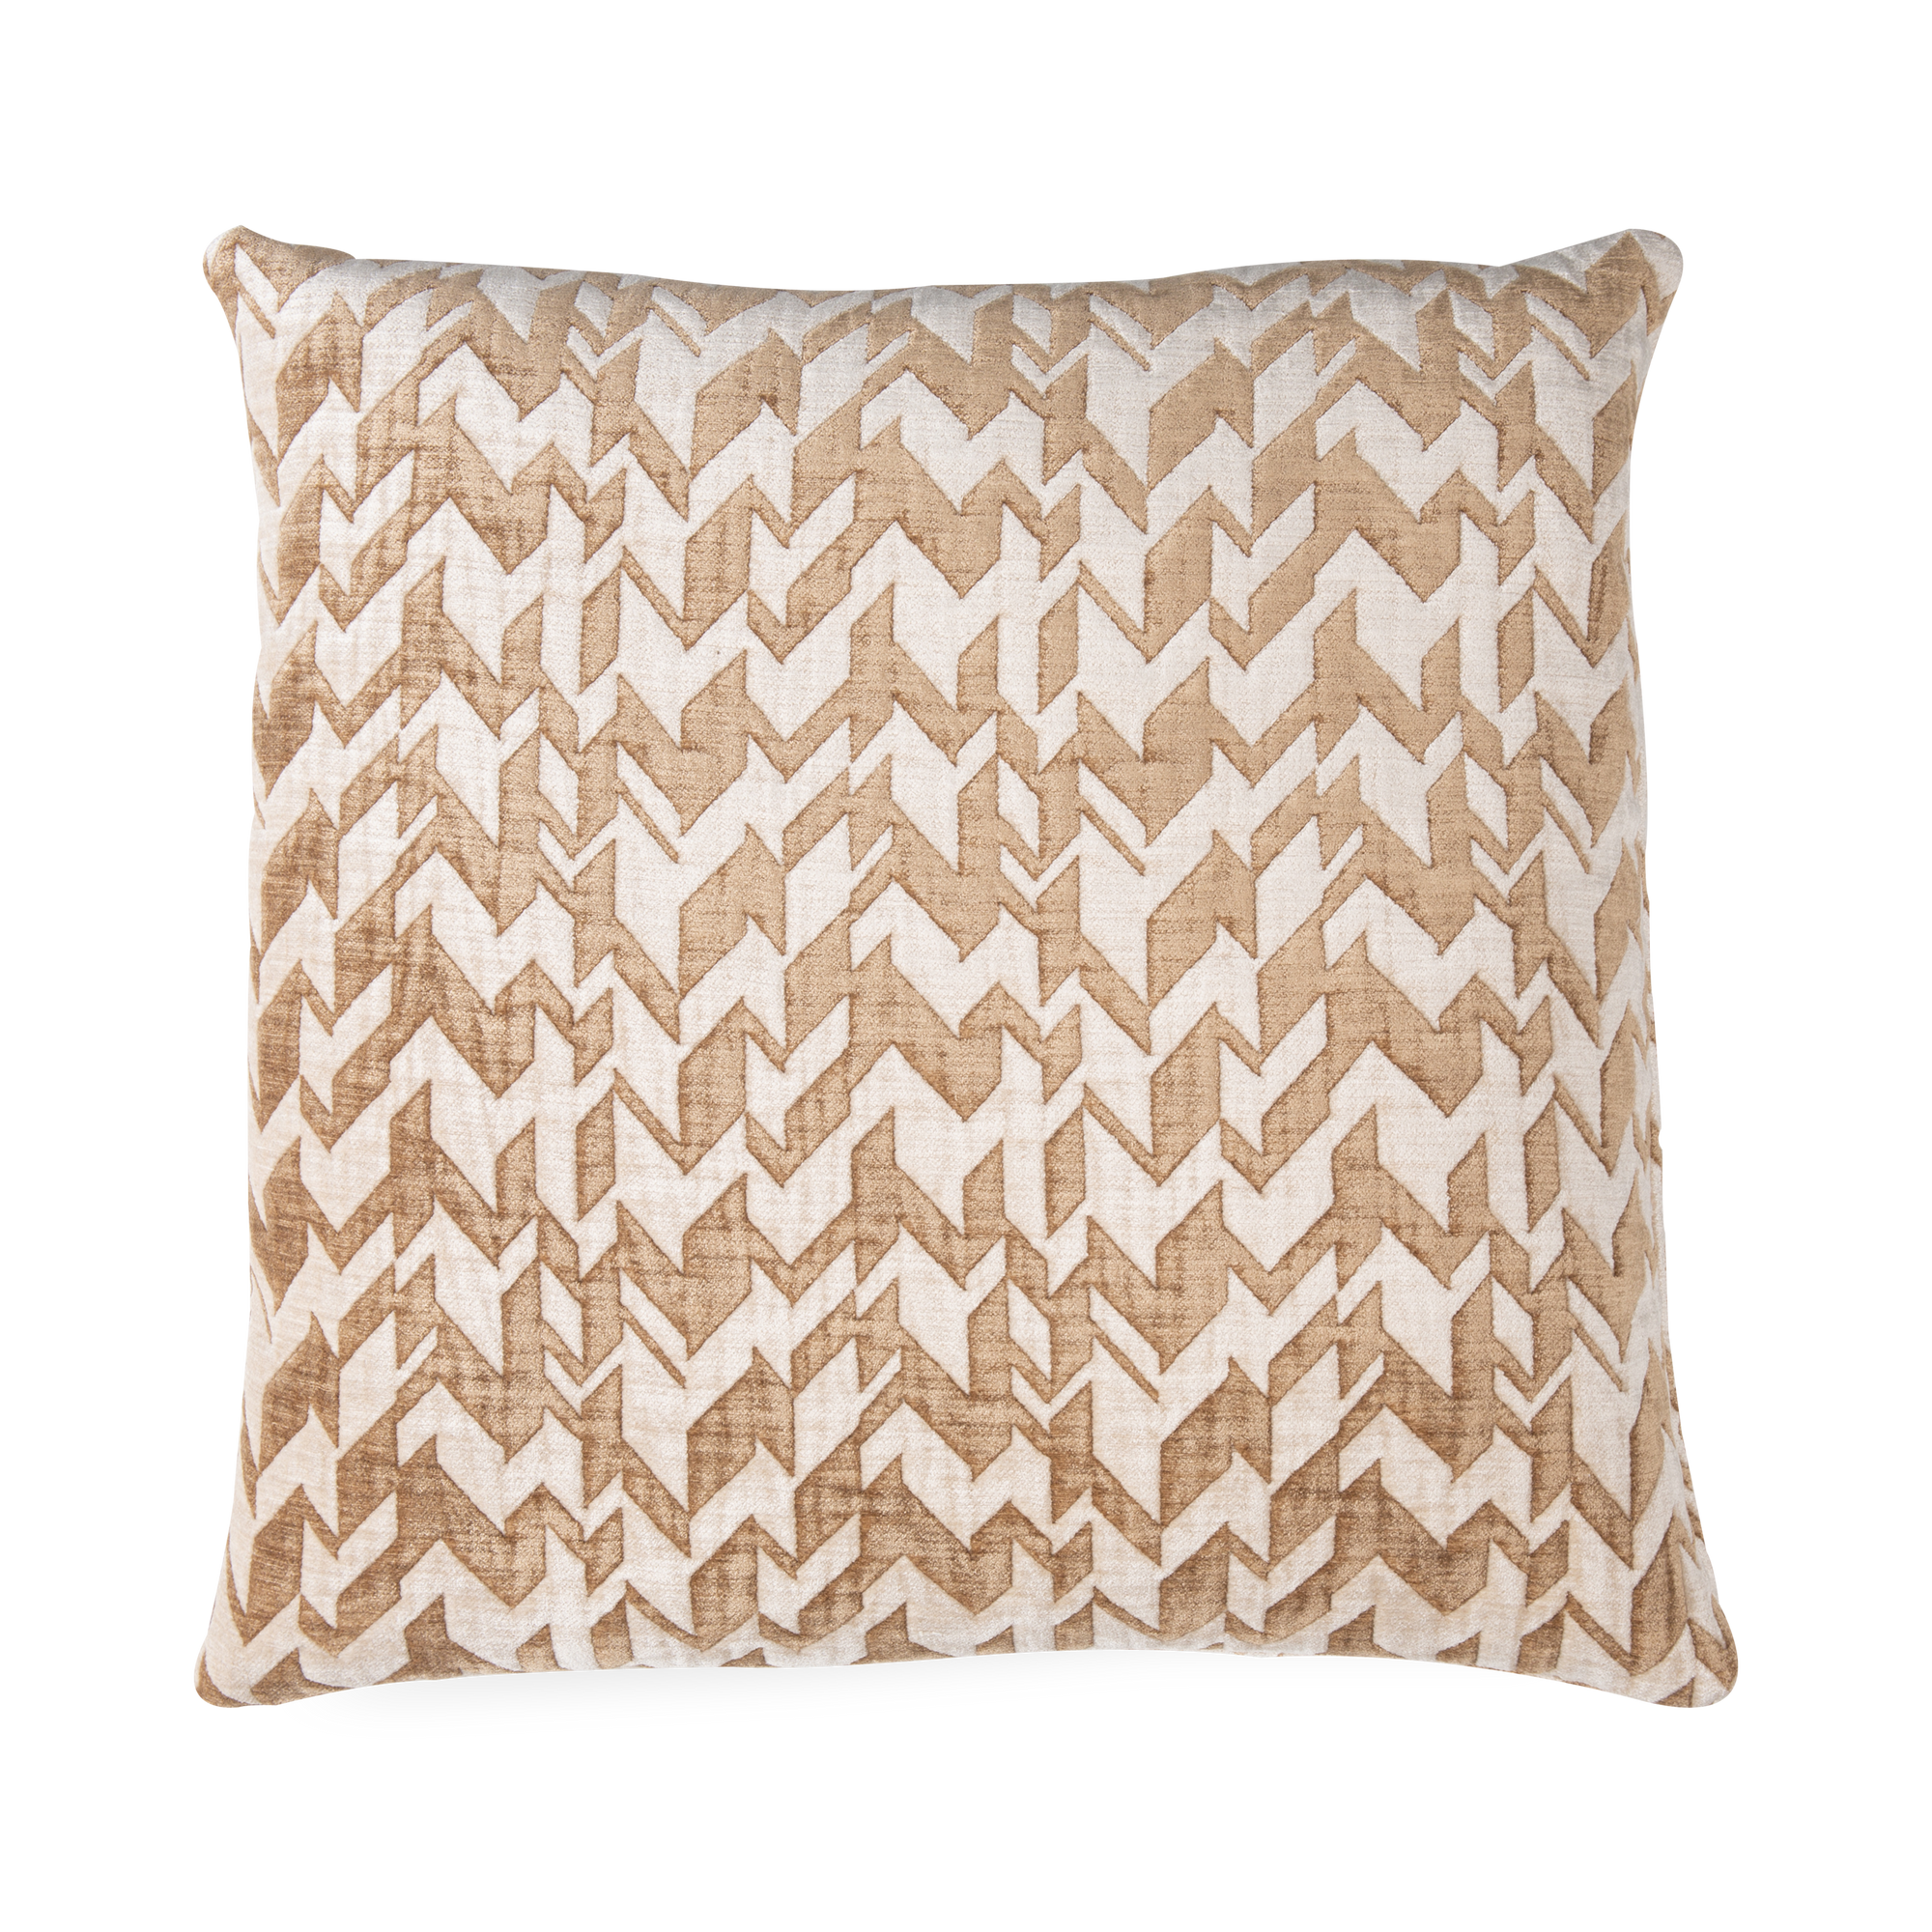 Characterized by its dynamic and geometric design, the Ecco Pillows adds a creative eye-catching design that provides a unique approach to your bedding and seating décor.